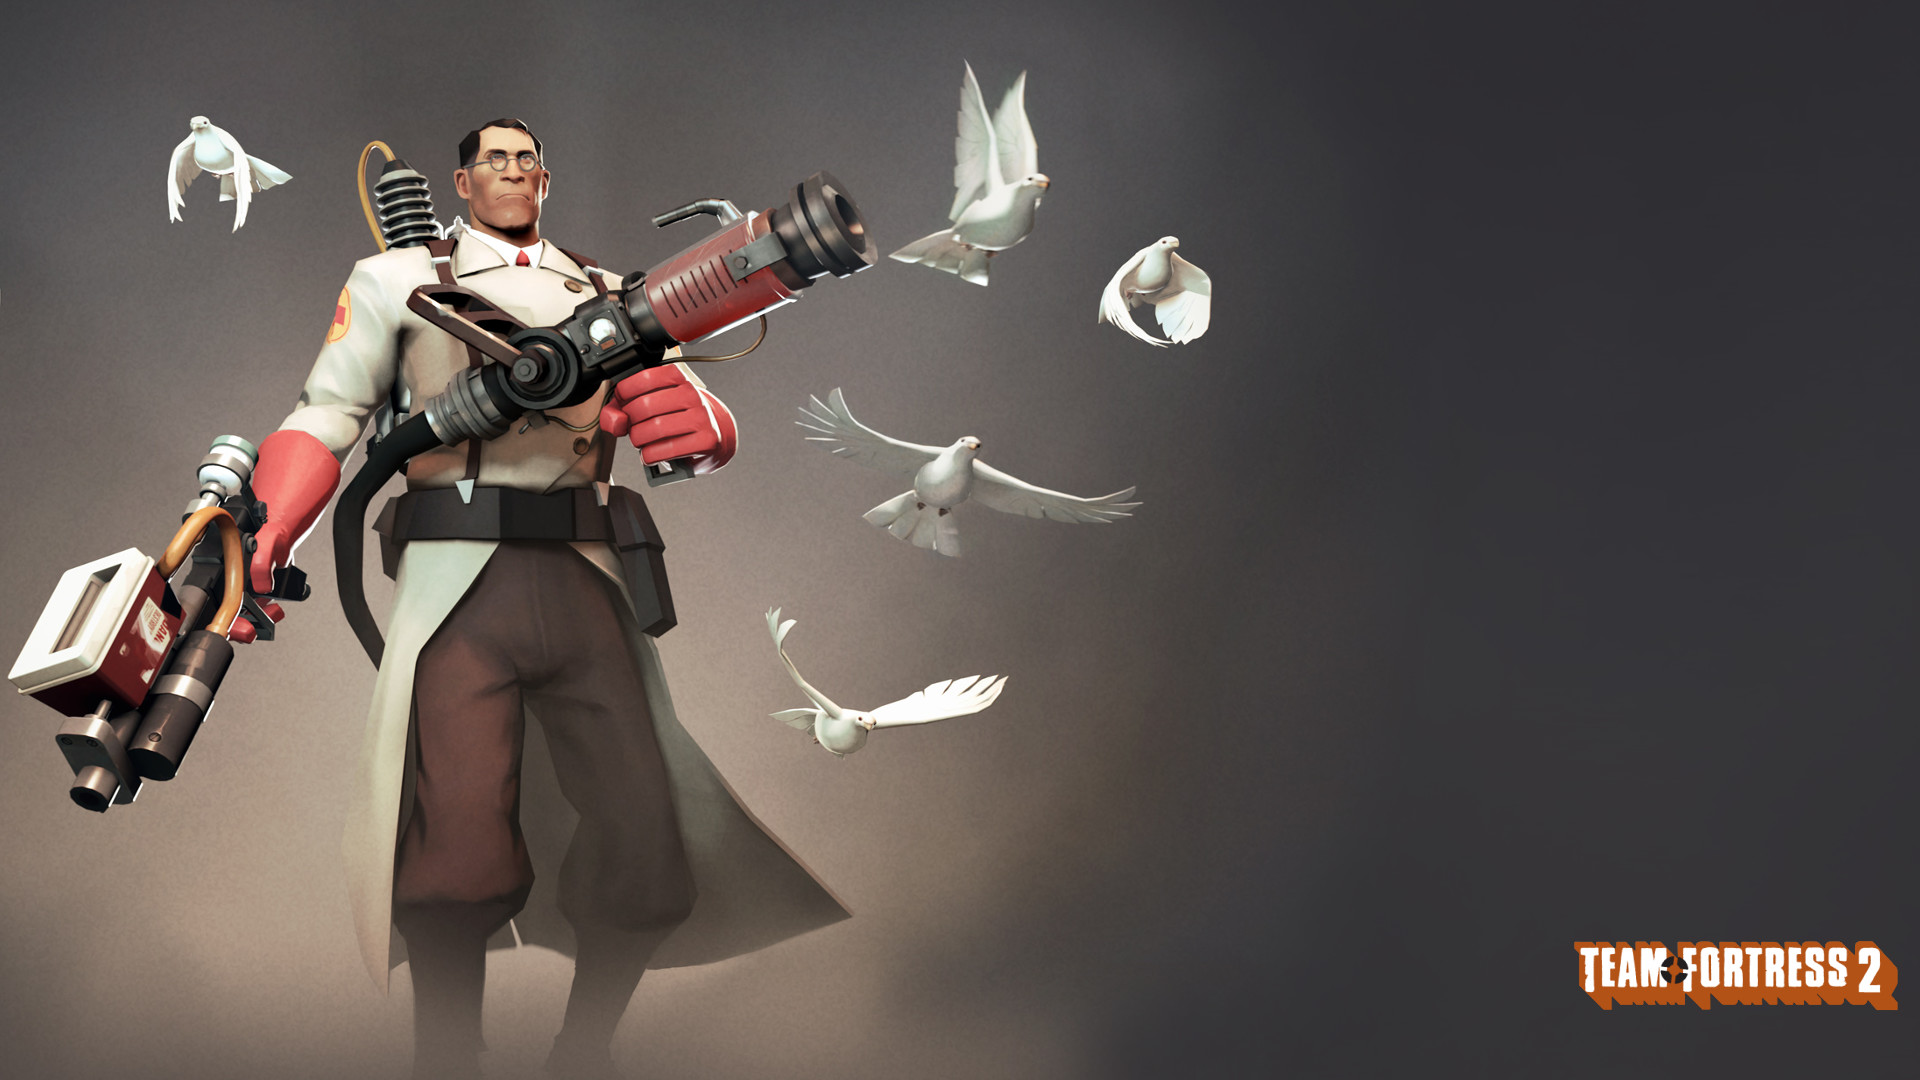 1920x1080 Team Fortress 2(TF2) images TF2 Medic HD wallpaper and background photos